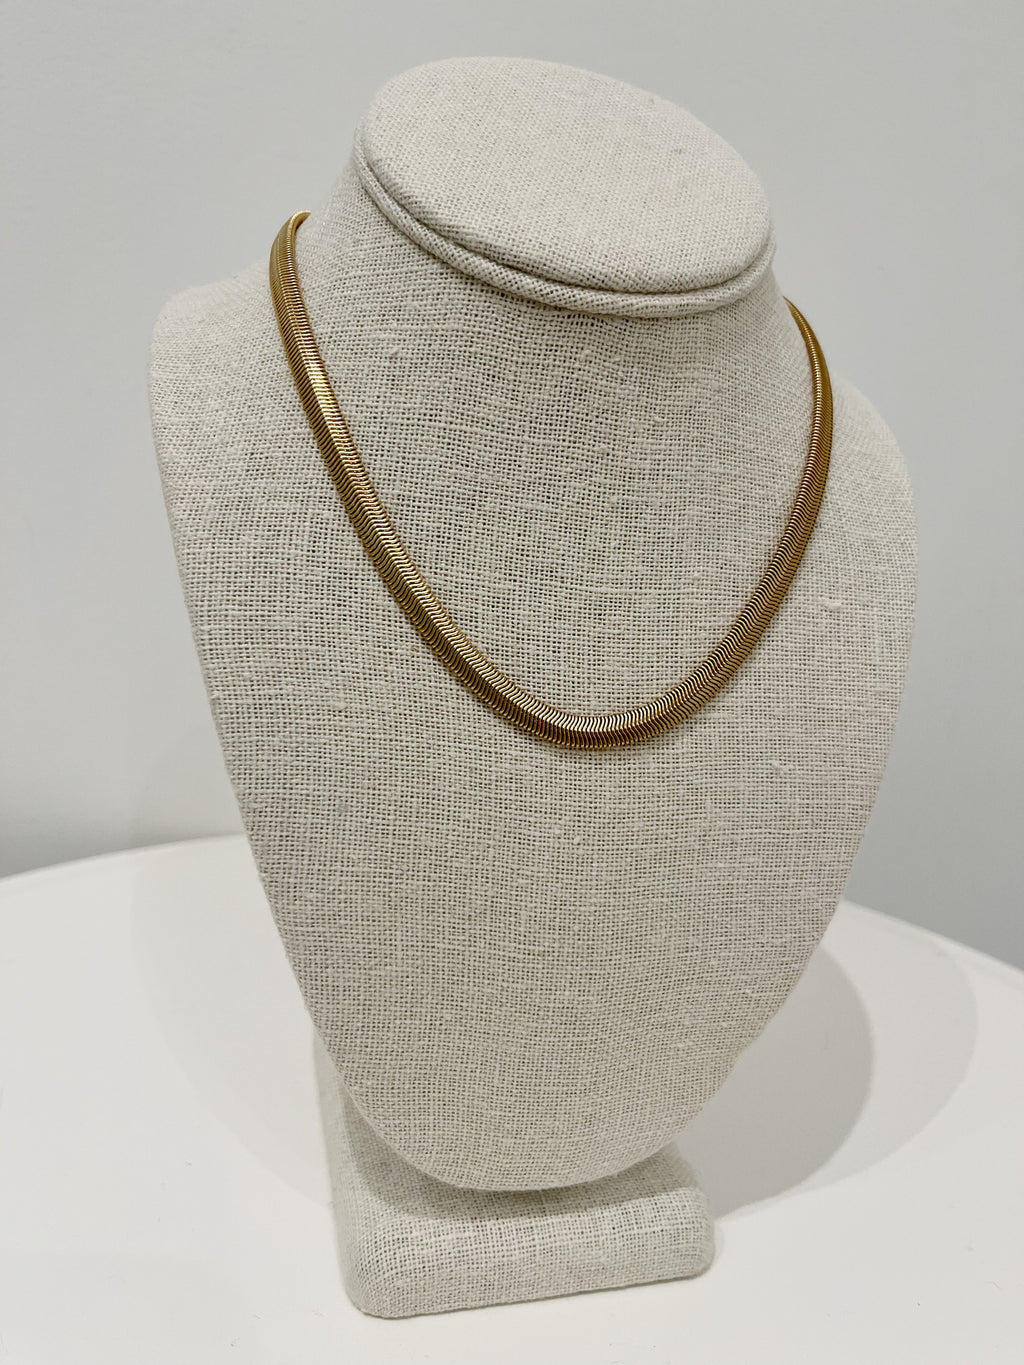 Gold-Plated Chain Necklace